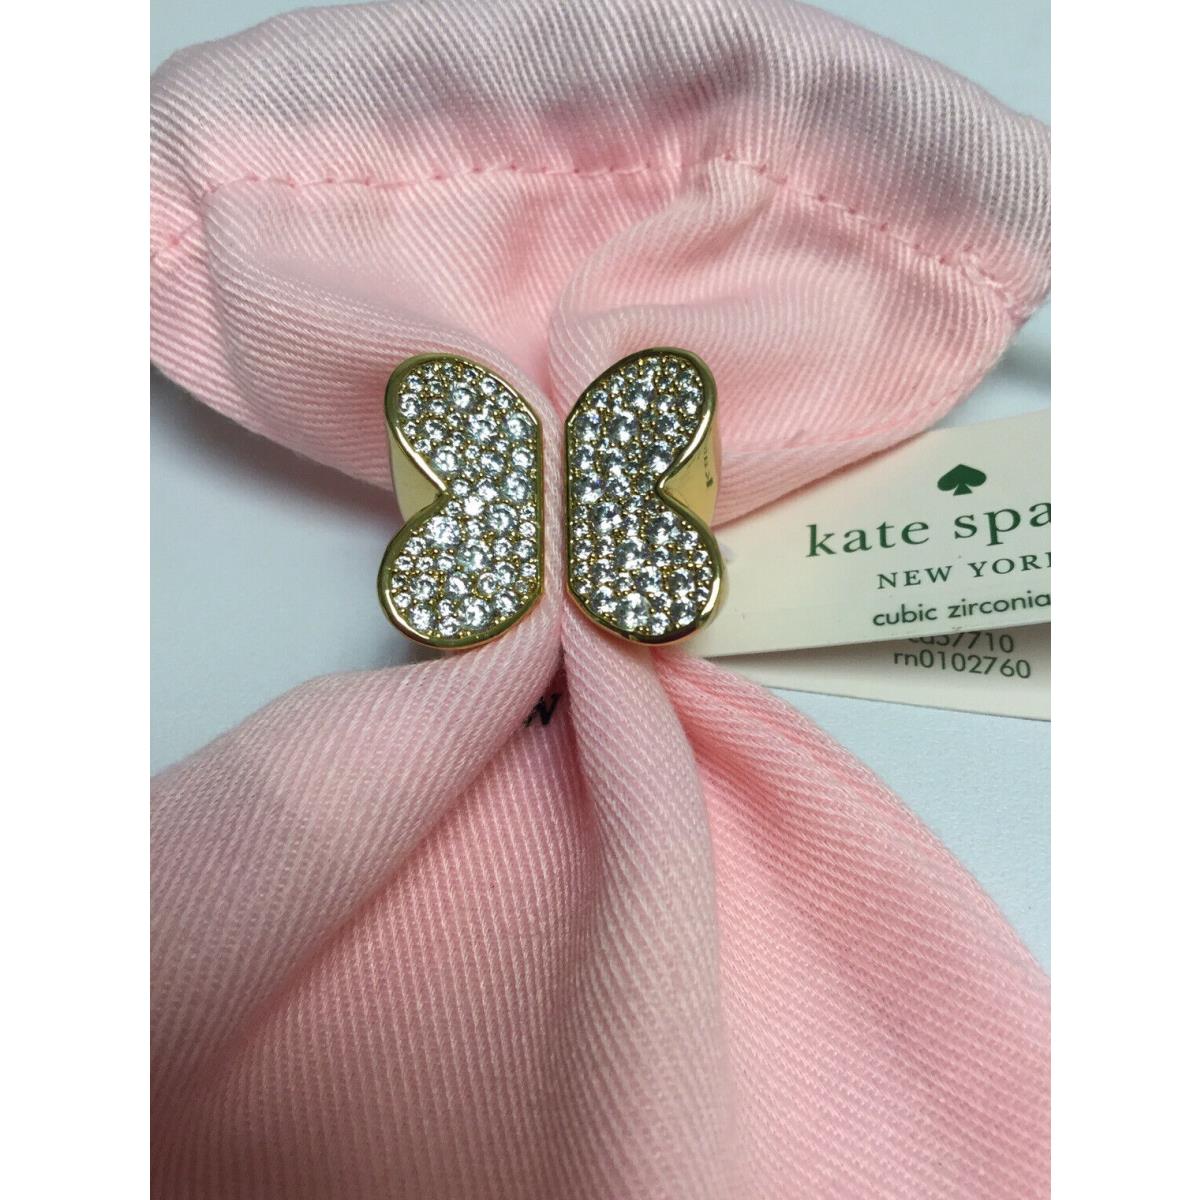 Kate Spade New York in a Flutter Pave Butterfly Ring Size 6 w/ KS Dust Bag